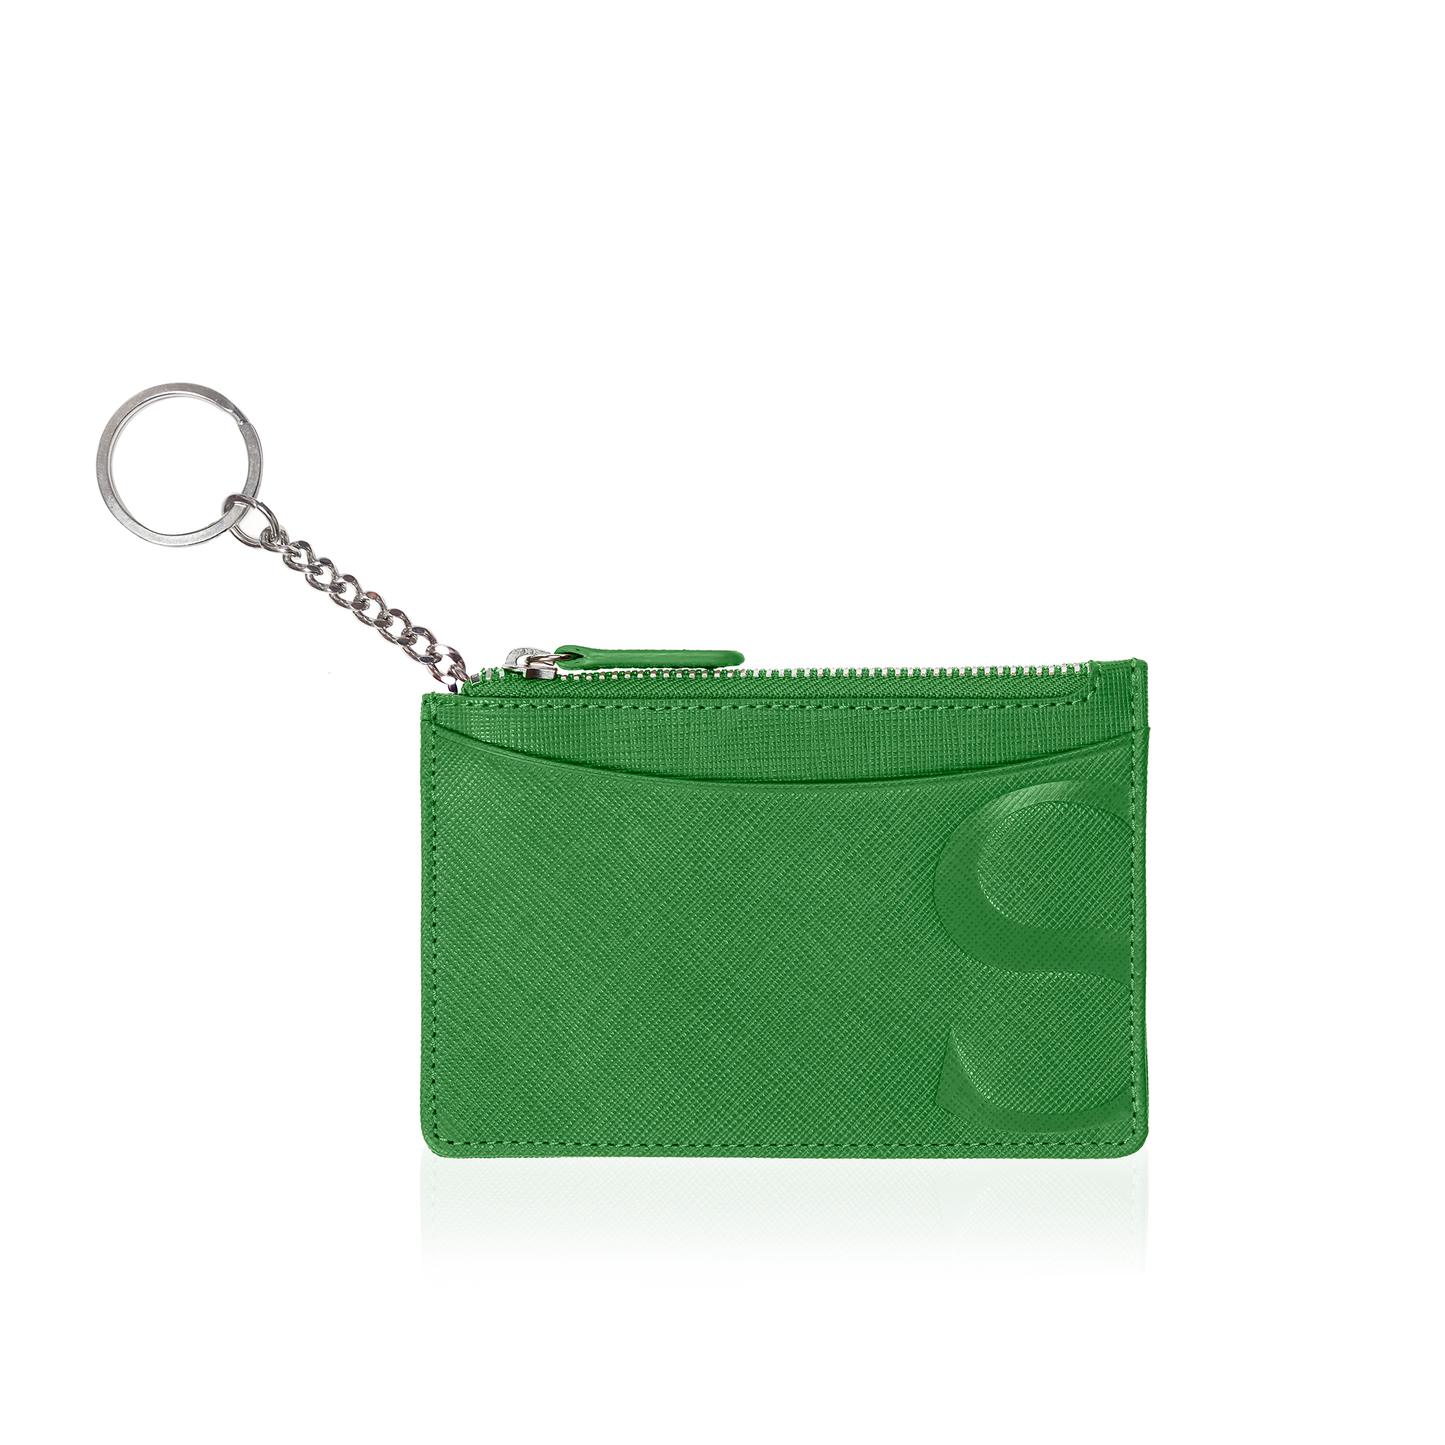 Credit Card Pouch with Keyring in Green Textured Leather.